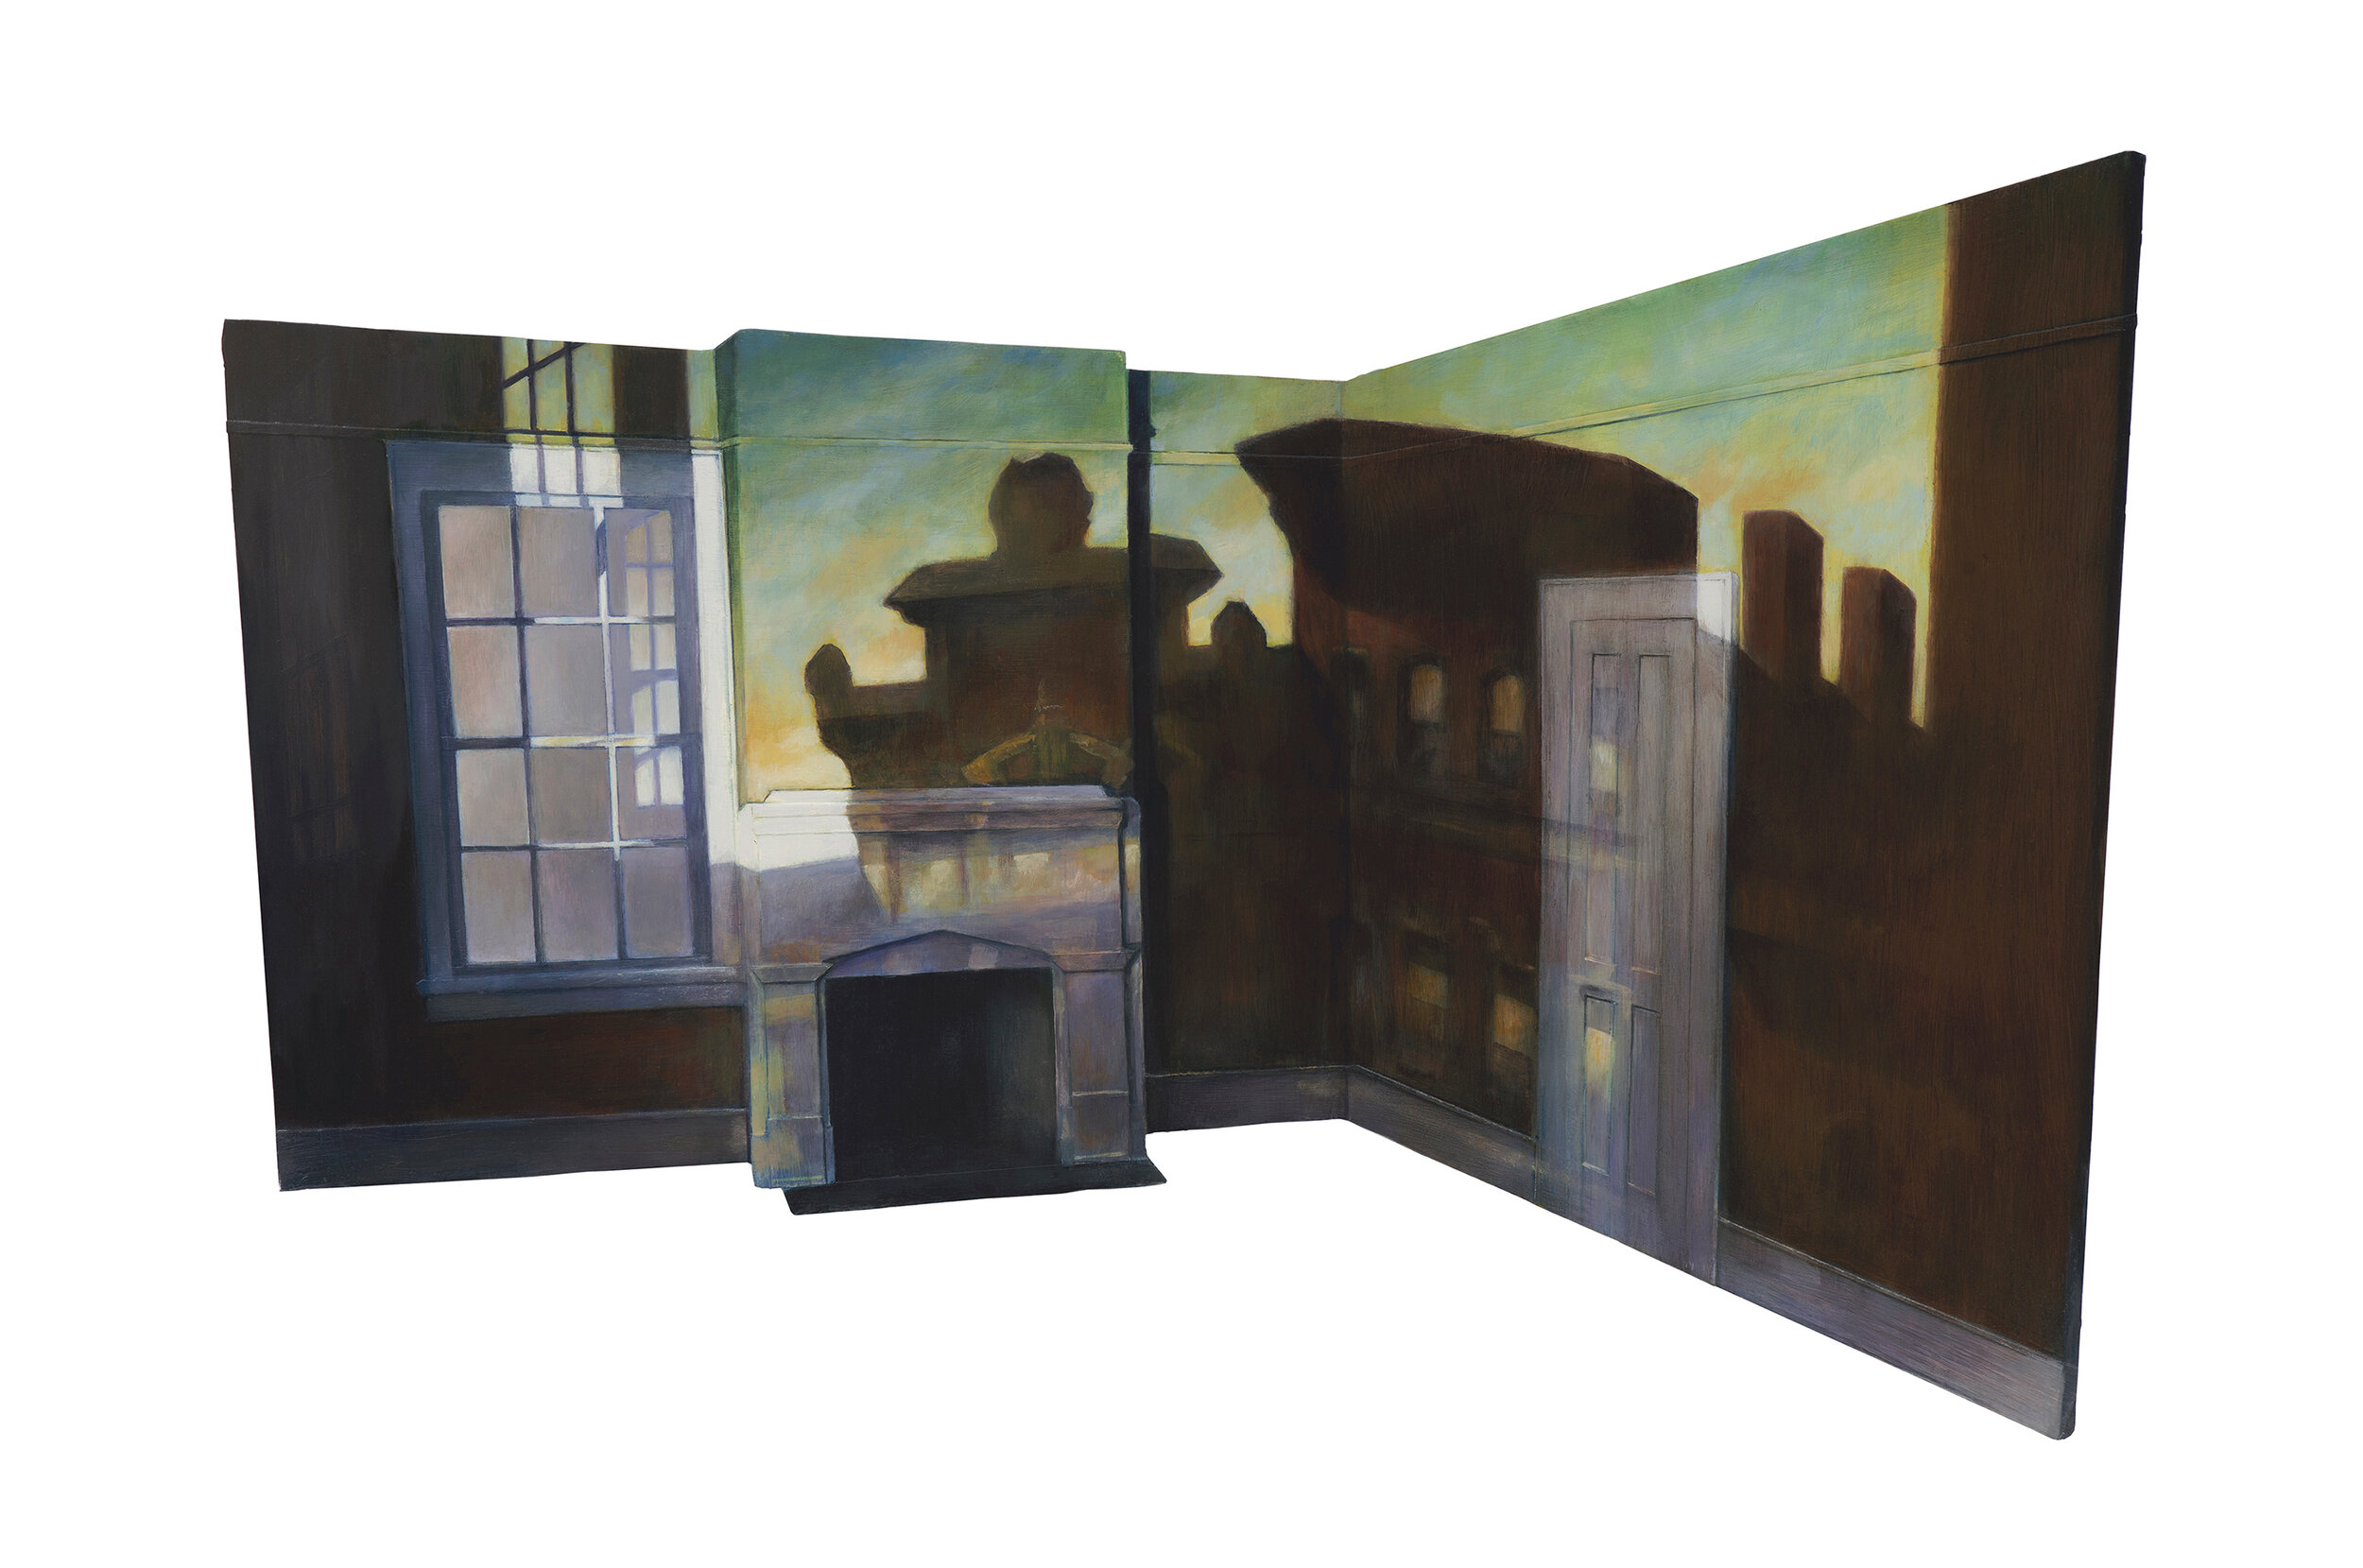   Edward Hopper’s “From Williamsburg Bridge” Projected over Hopper Bedroom Model   2019  Oil on shaped and raised relief panel  16.5 x 24.5 inches 